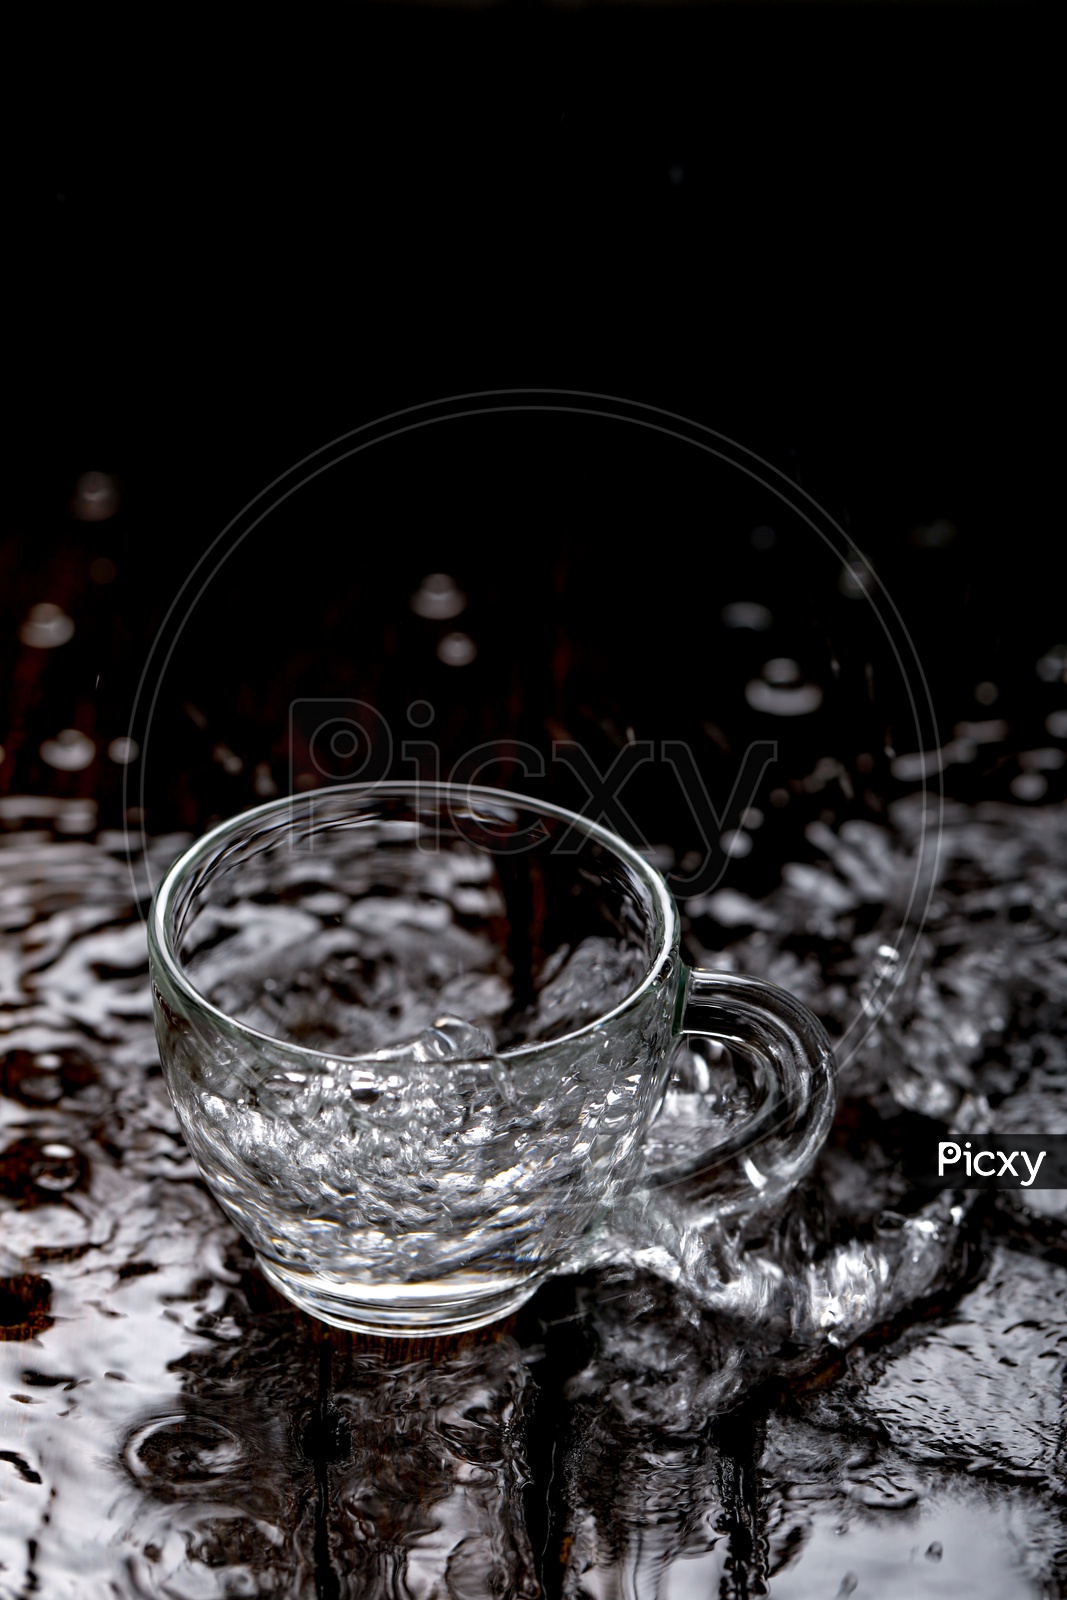 Empty Glass  Tea Cup Filling  With Water And Water Splash On an Wooden  Table Background